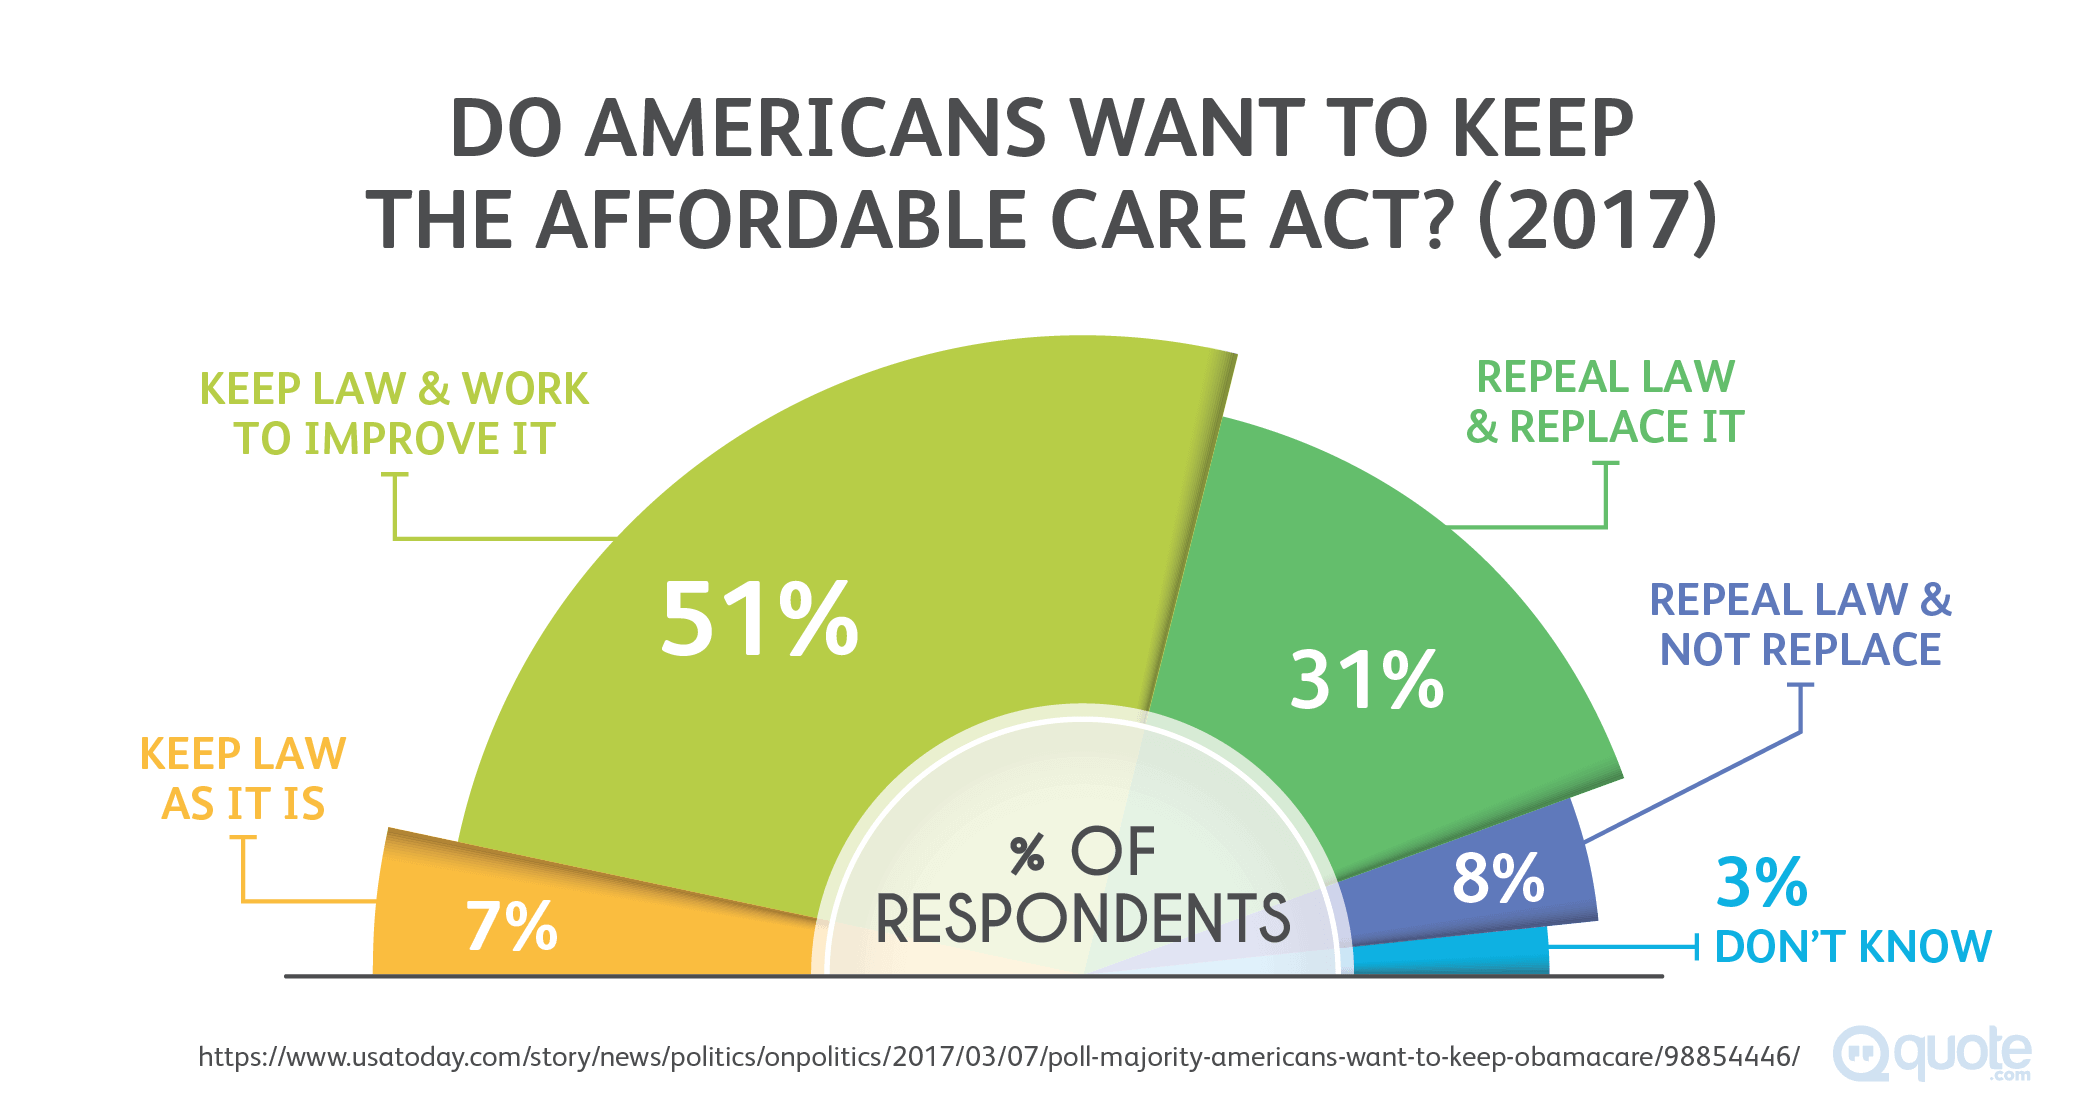 Survey Result: Do Americans Want To Keep the Affordable Care Act?